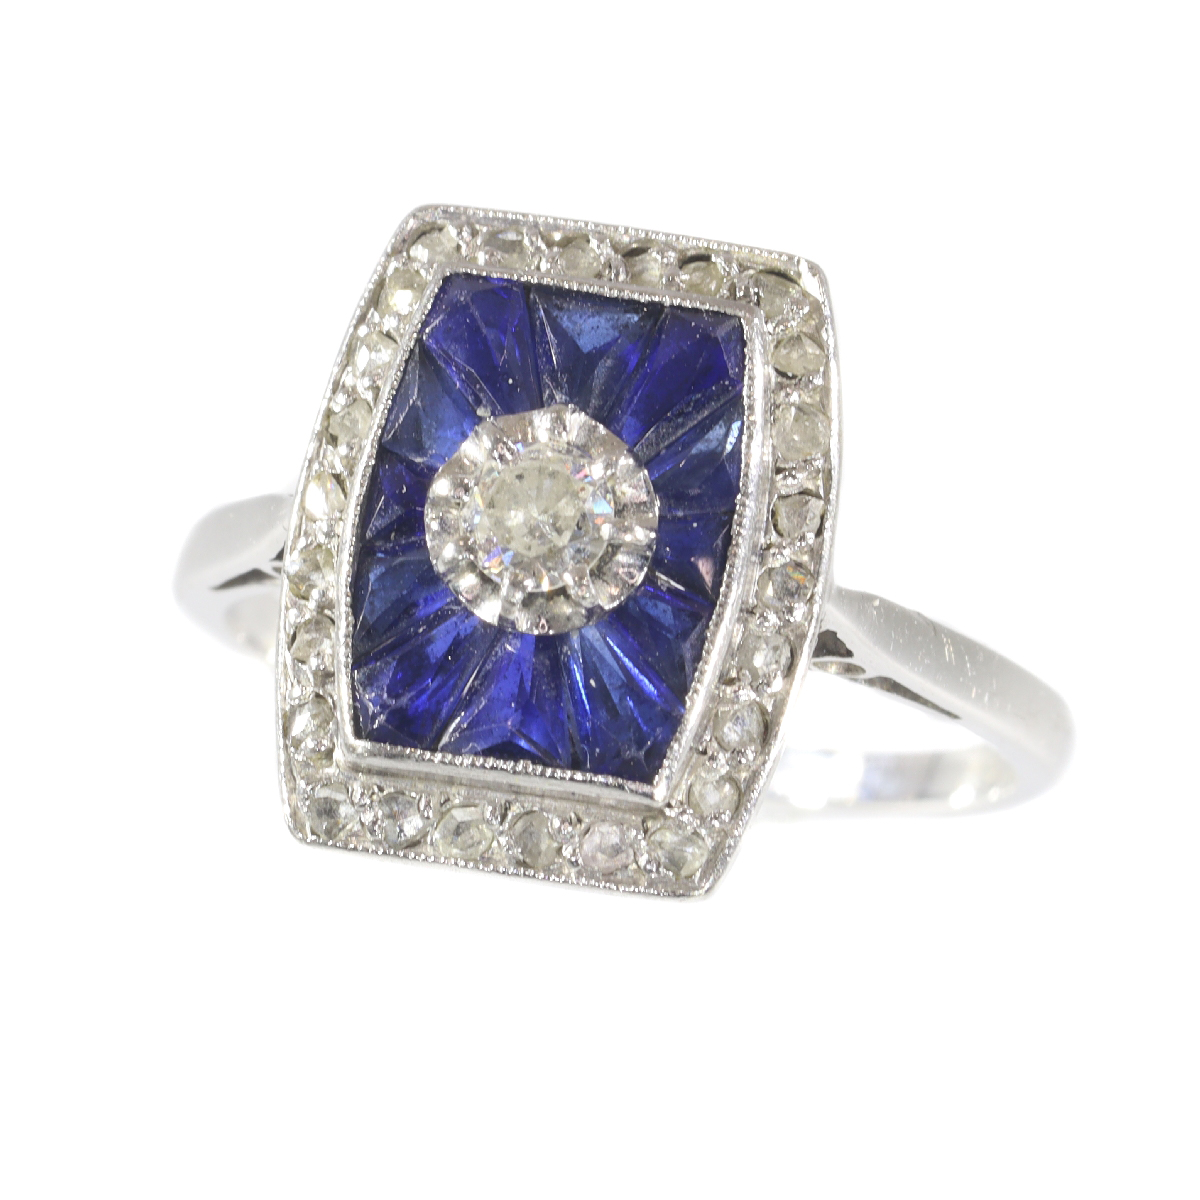 French Art Deco Vintage diamond and sapphire engagement ring